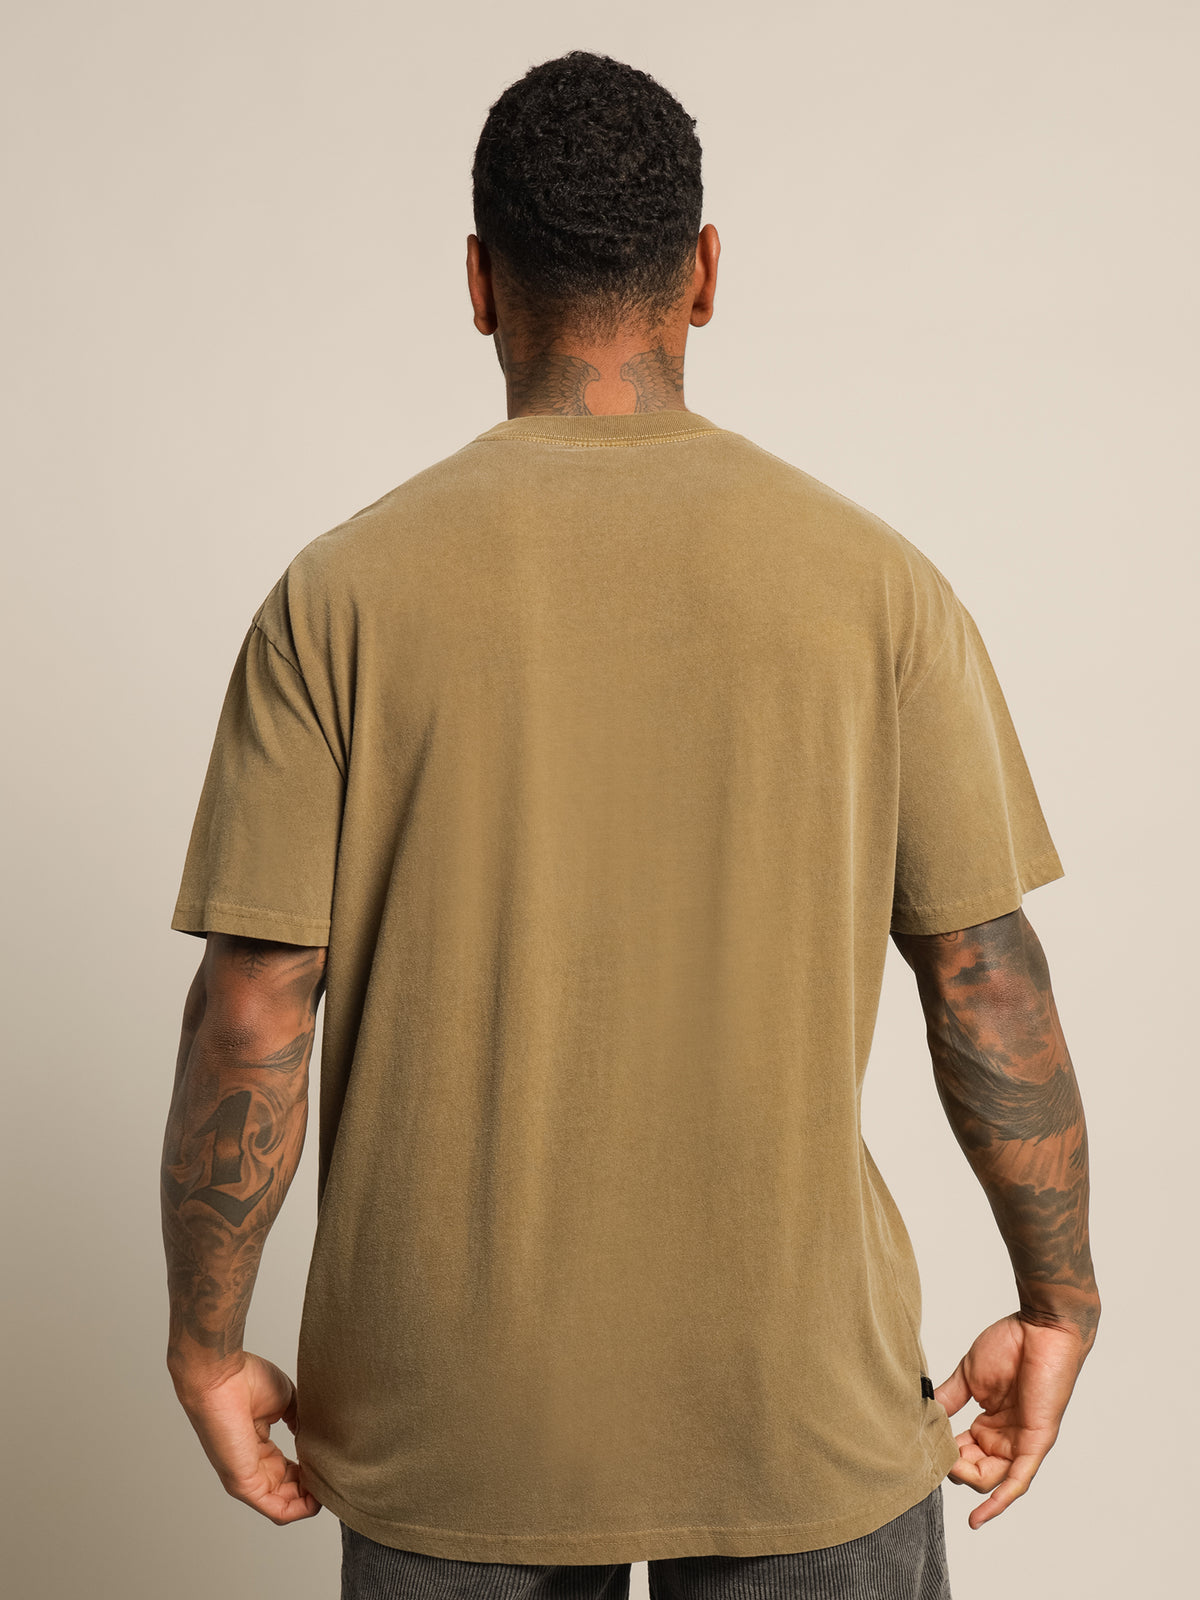 Shadow Stock T-Shirt in Tobacco Brown